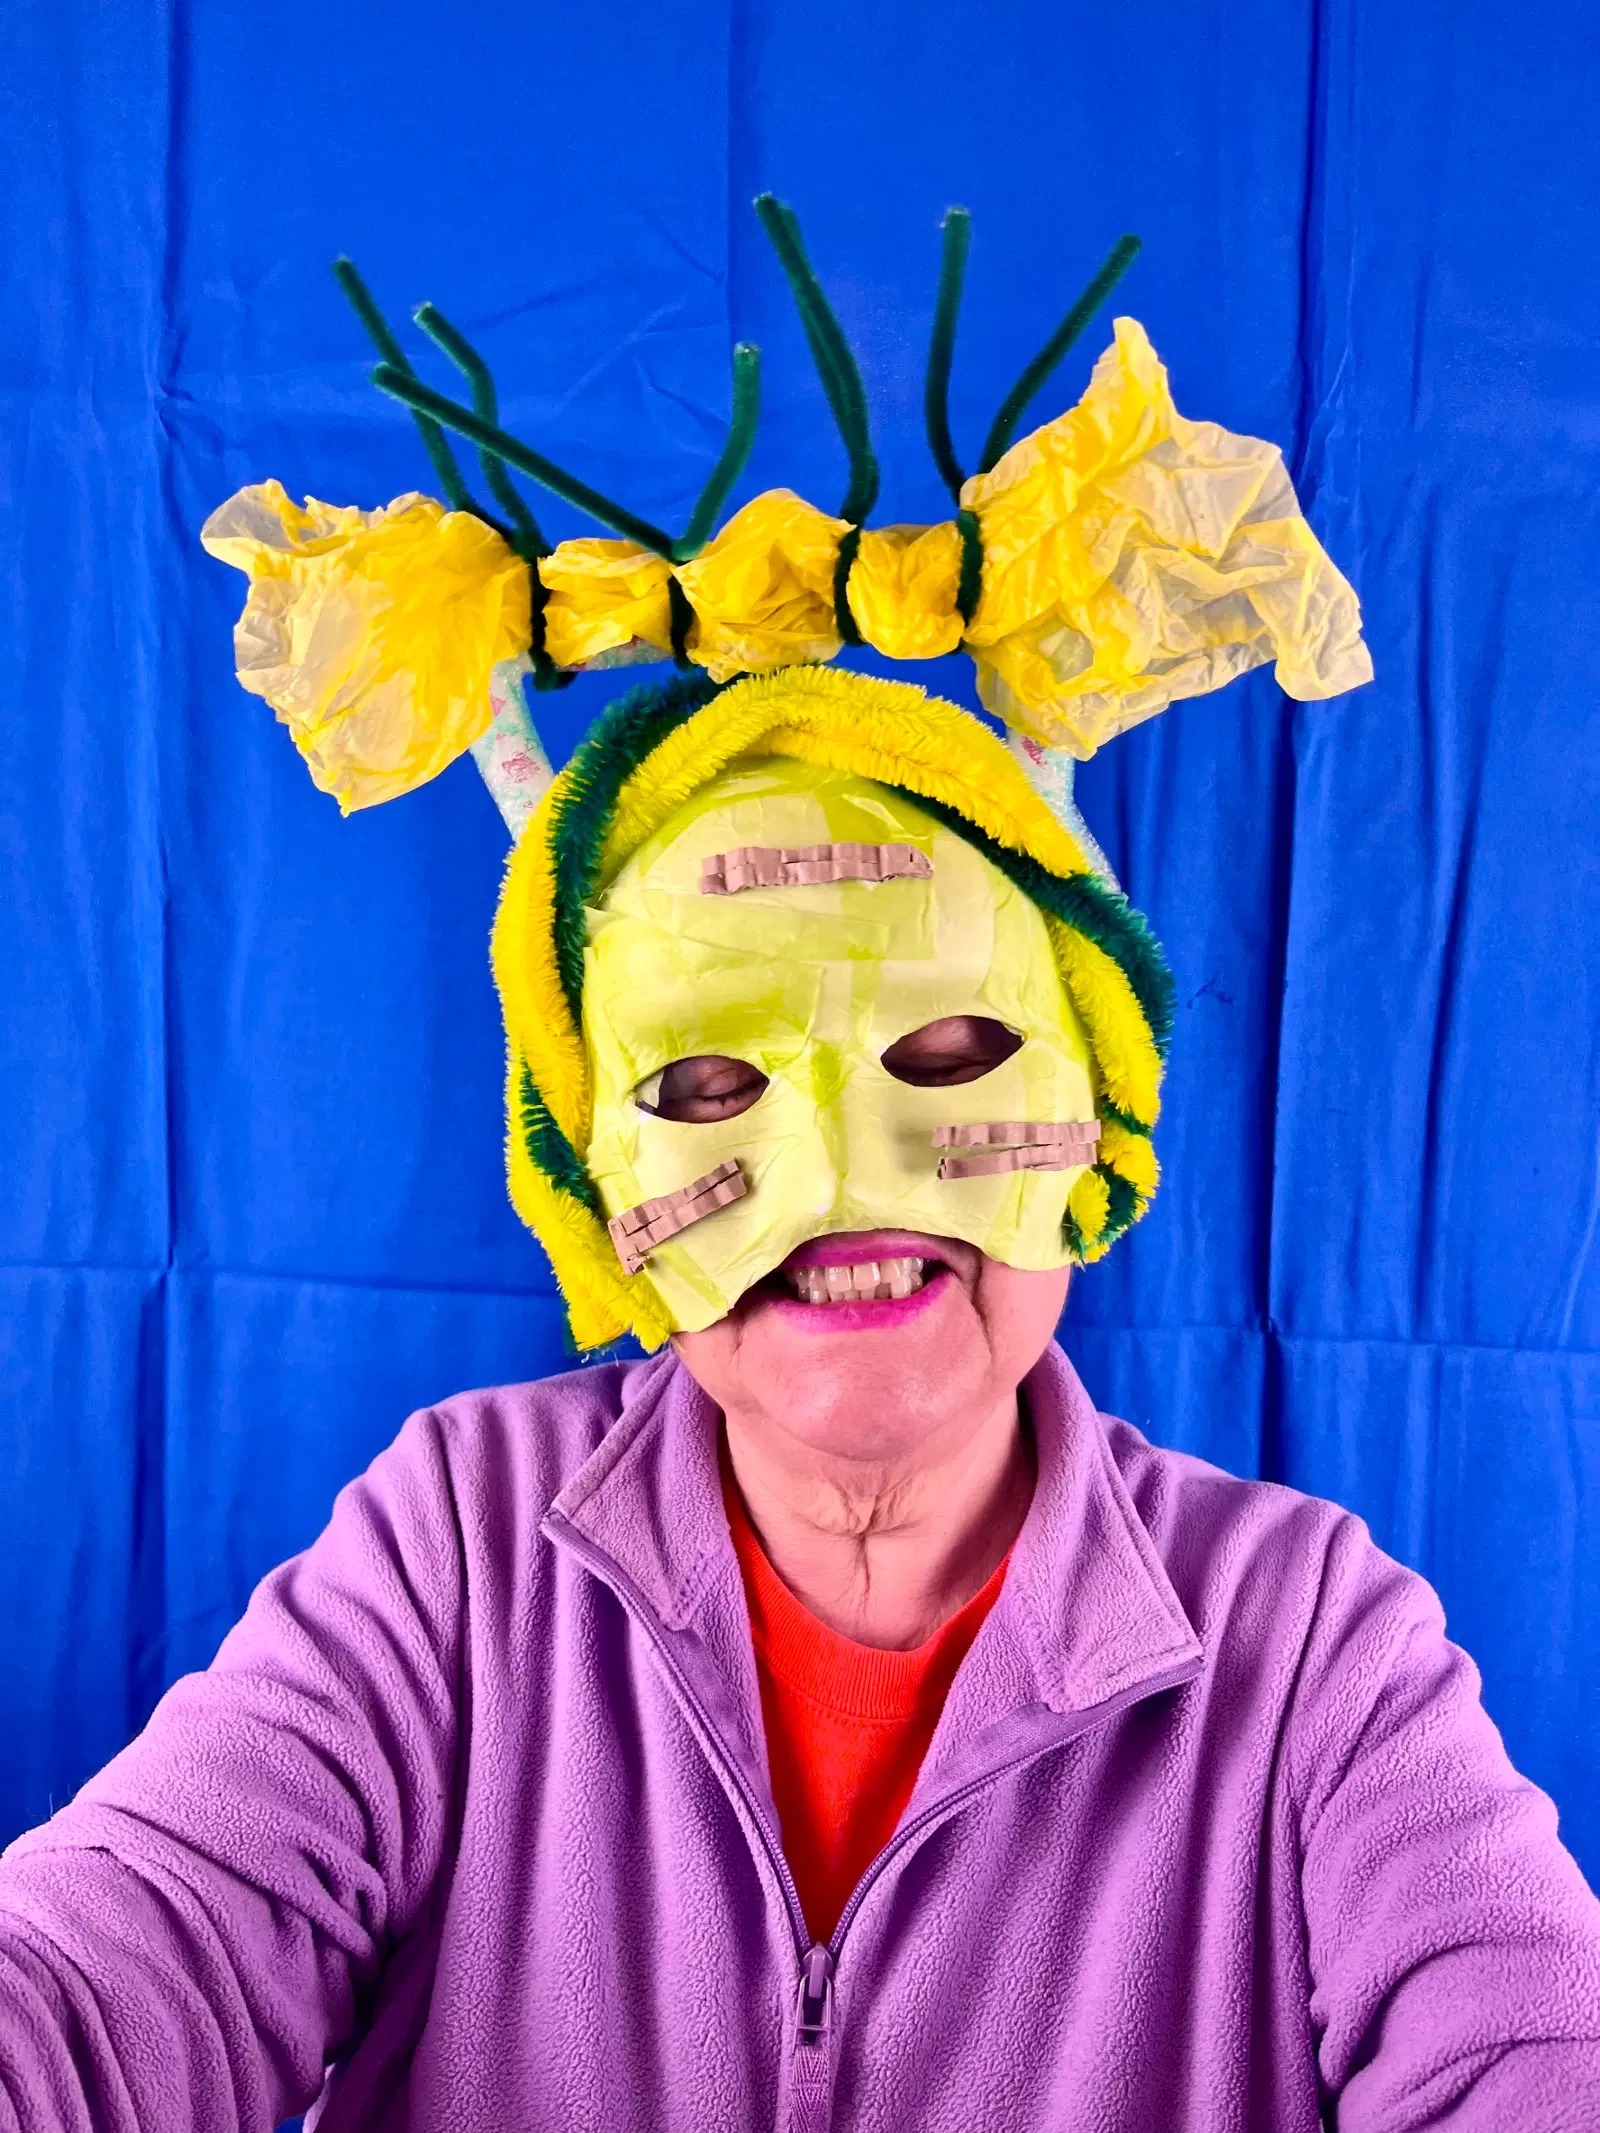 A person wearing a colorful handmade mask that resembles a whimsical creature, with yellow and green elements and protruding pipe cleaner antennae, against a bright blue backdrop.